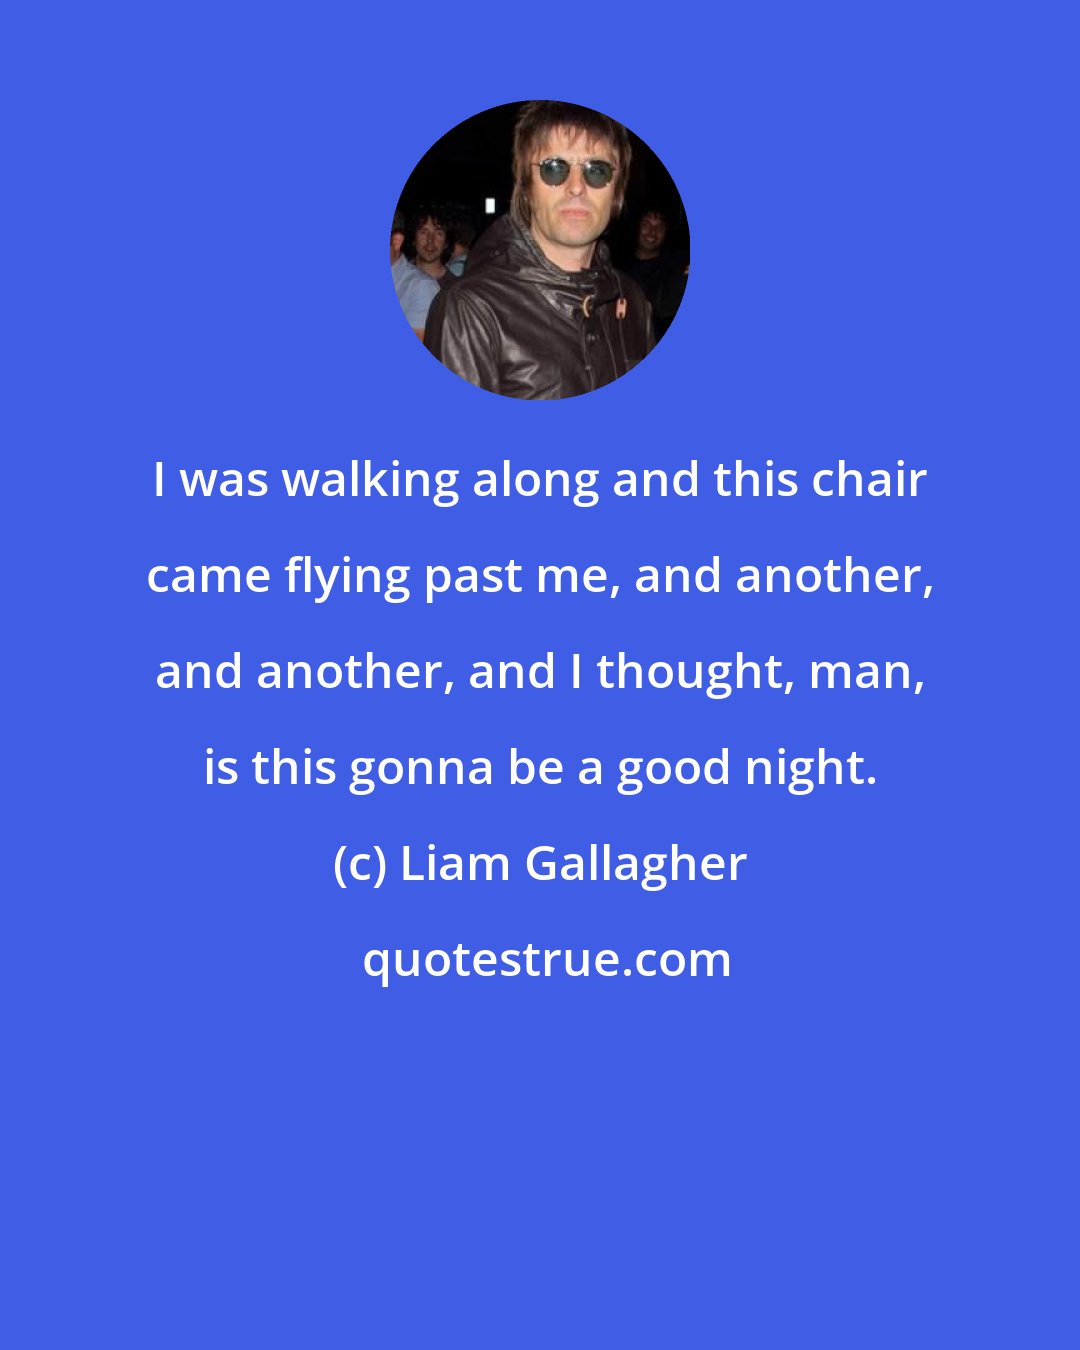 Liam Gallagher: I was walking along and this chair came flying past me, and another, and another, and I thought, man, is this gonna be a good night.